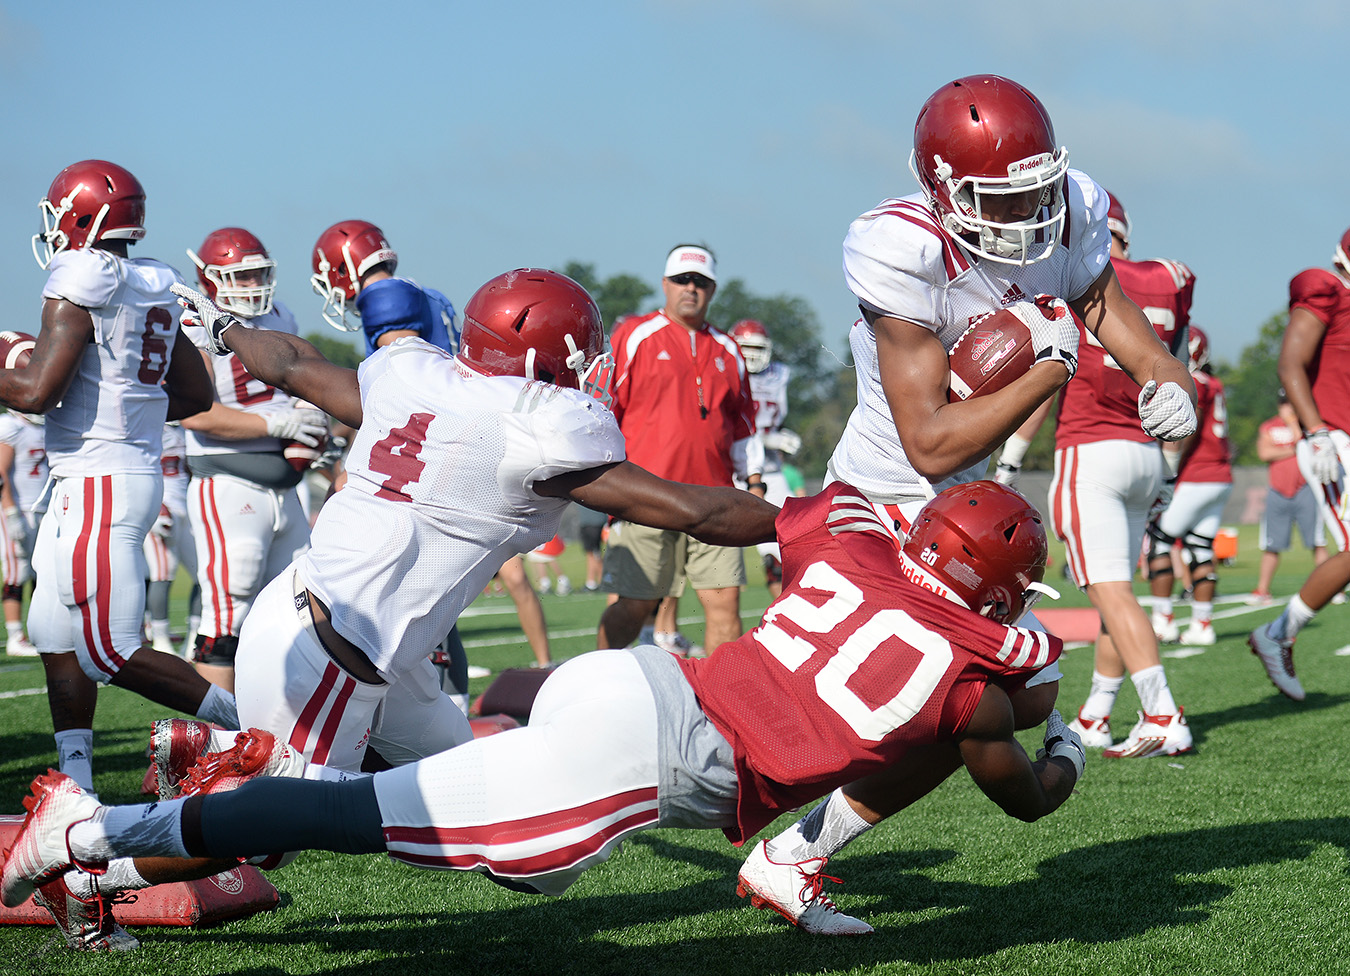 Wide receiver Ricky Jones (4) tries to block defensive back Jameel Cook Jr. (20) in the Oklahoma Drill. Mangieri says the drill is one of Coach Wilson’s favorites — and a good way to see what players are made of. Mangieri calls it man-on-man, bone-on-bone “fun.” | Photo by Mike Dickbernd